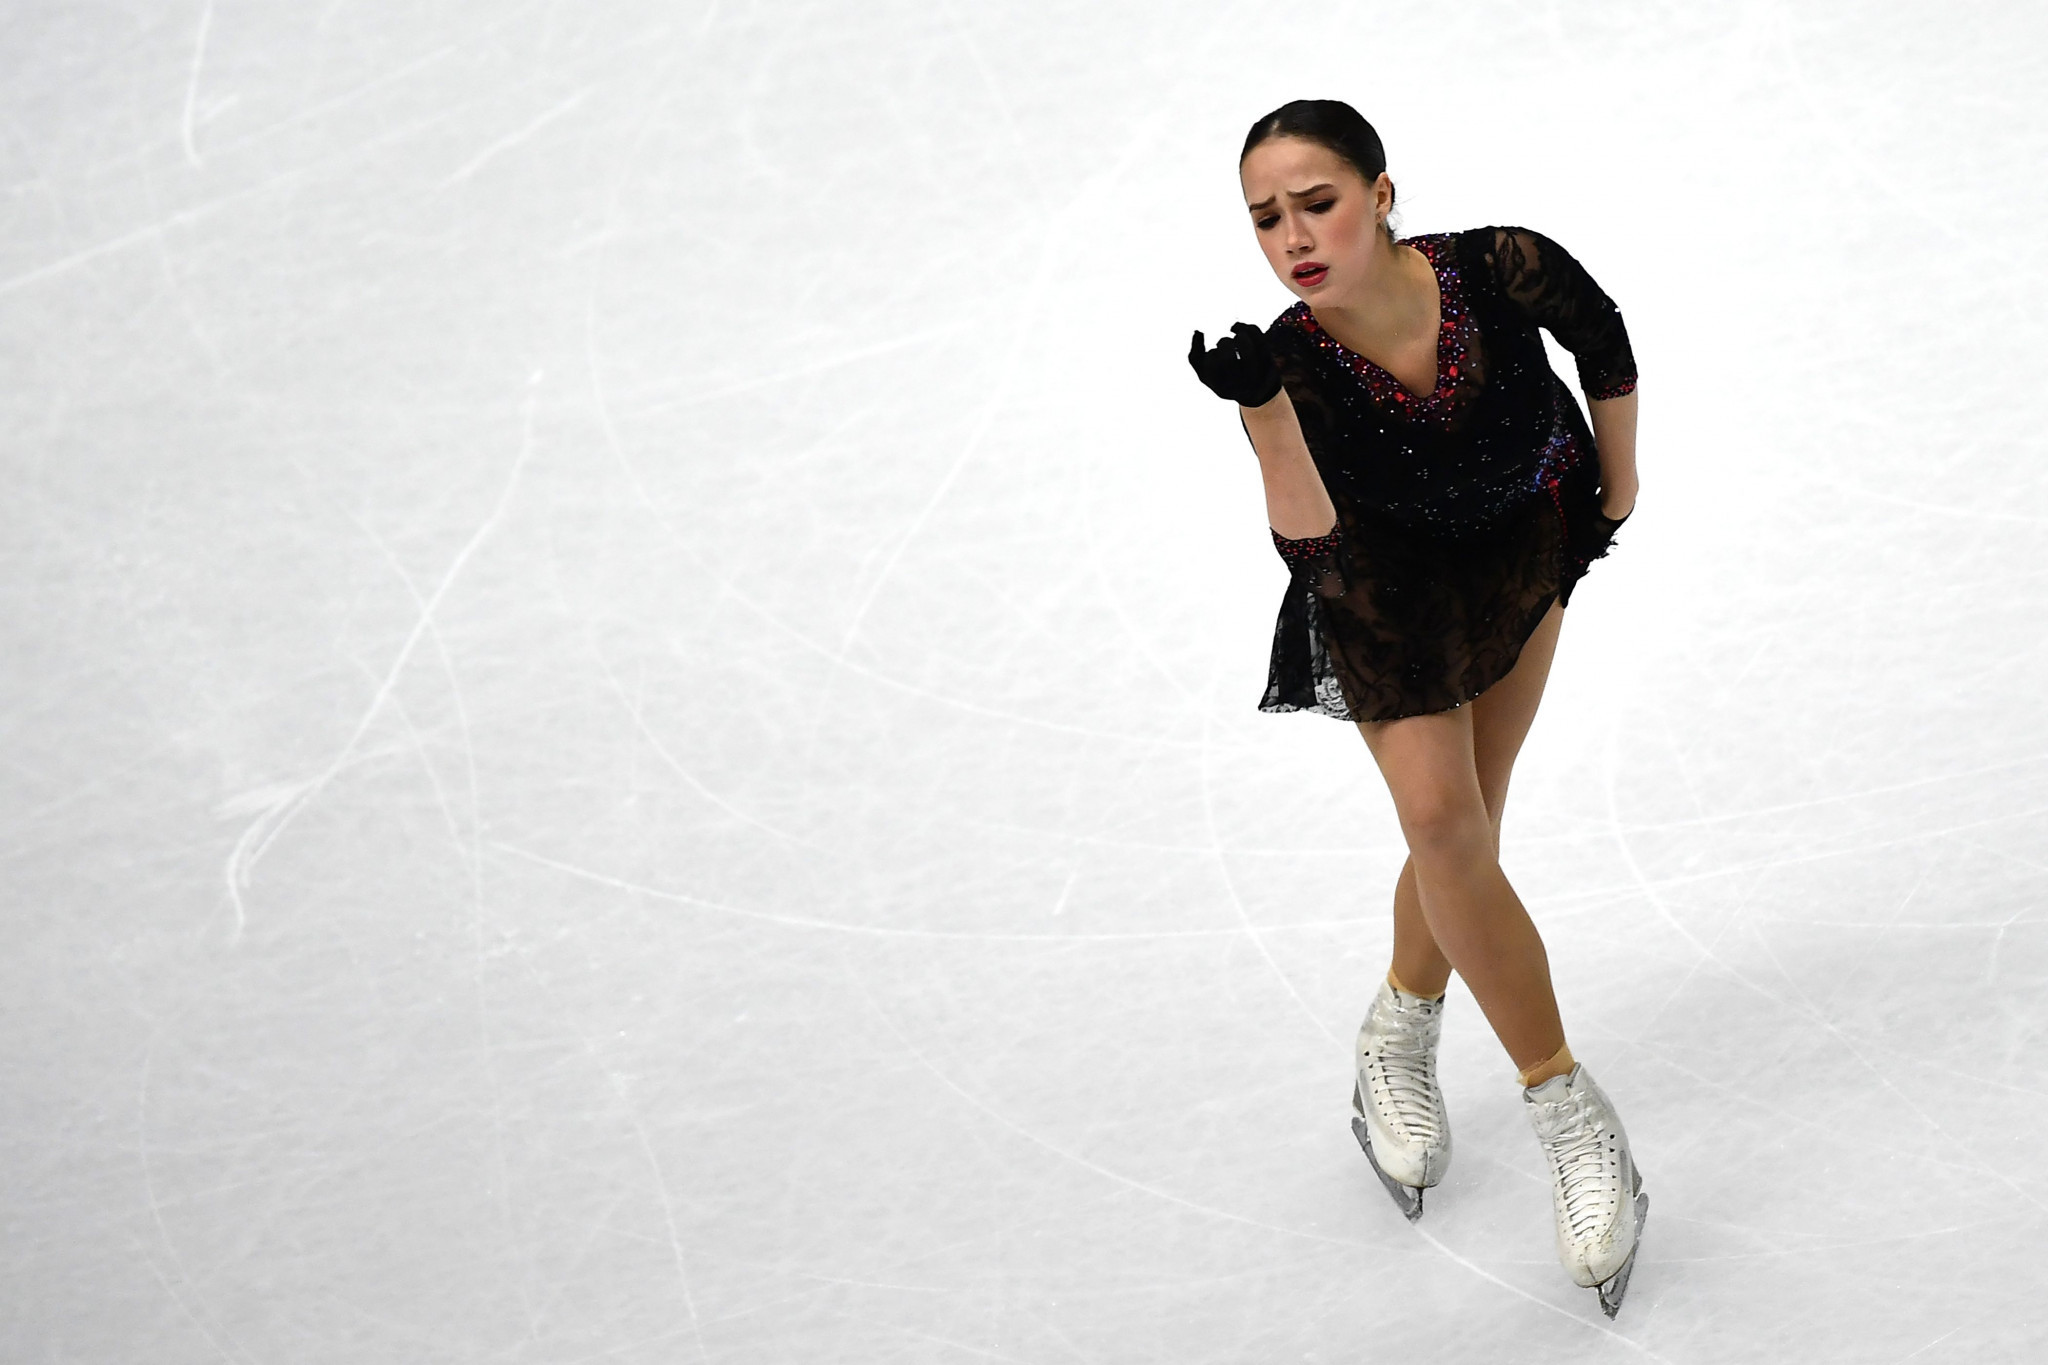 Zagitova rejects retirement rumours after announcing break from figure skating